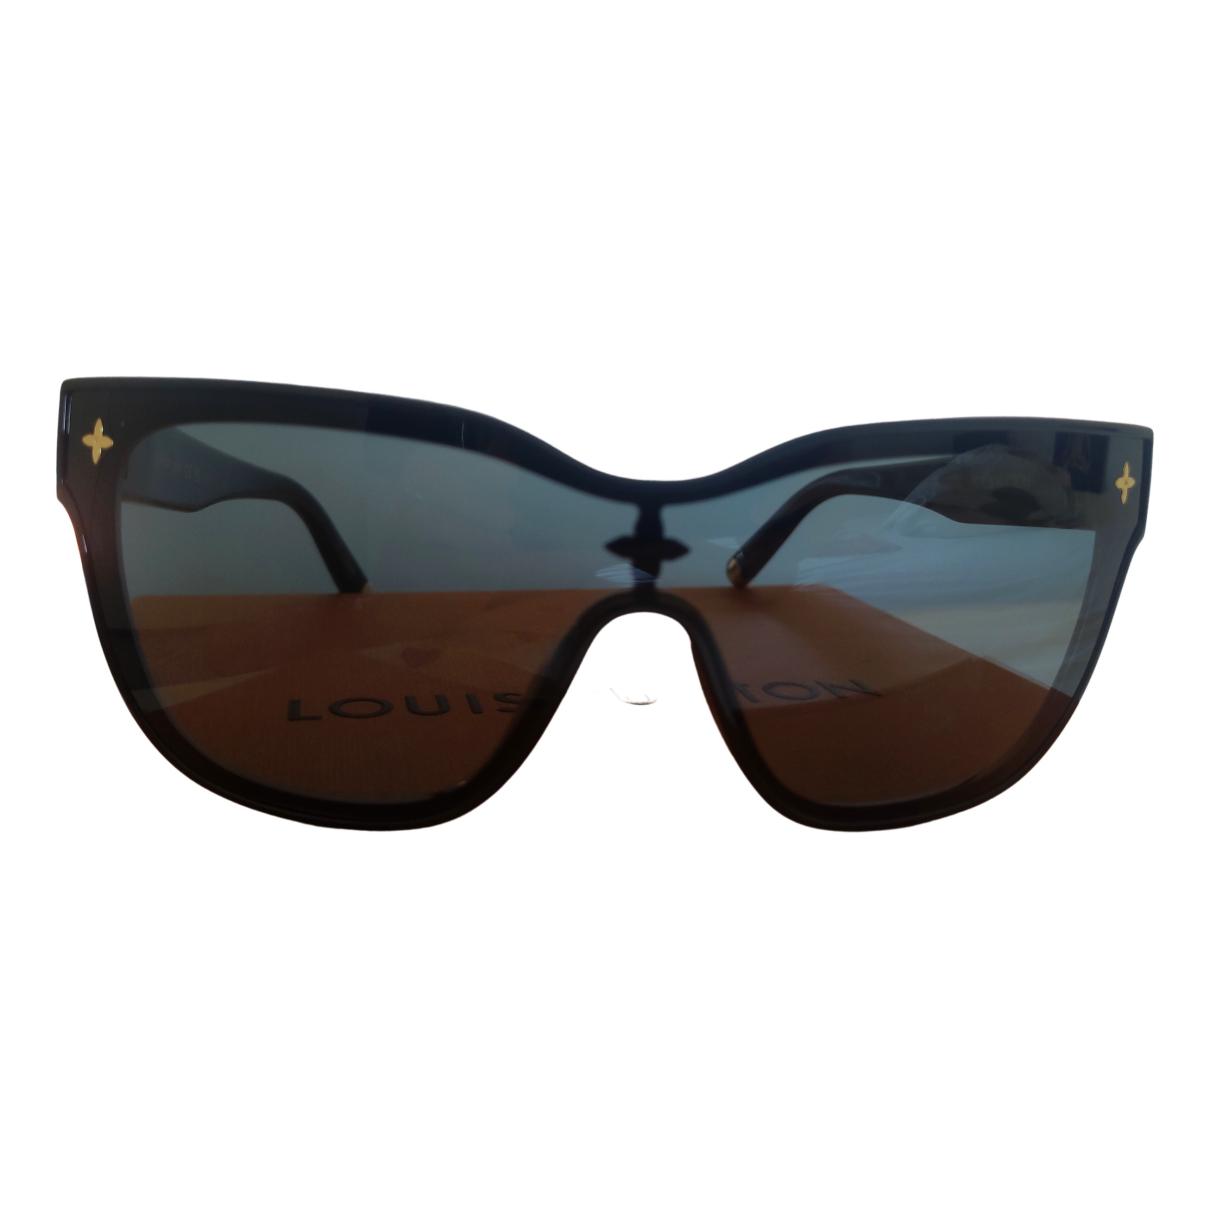 Sunglasses Louis Vuitton Black in Other - 20503361